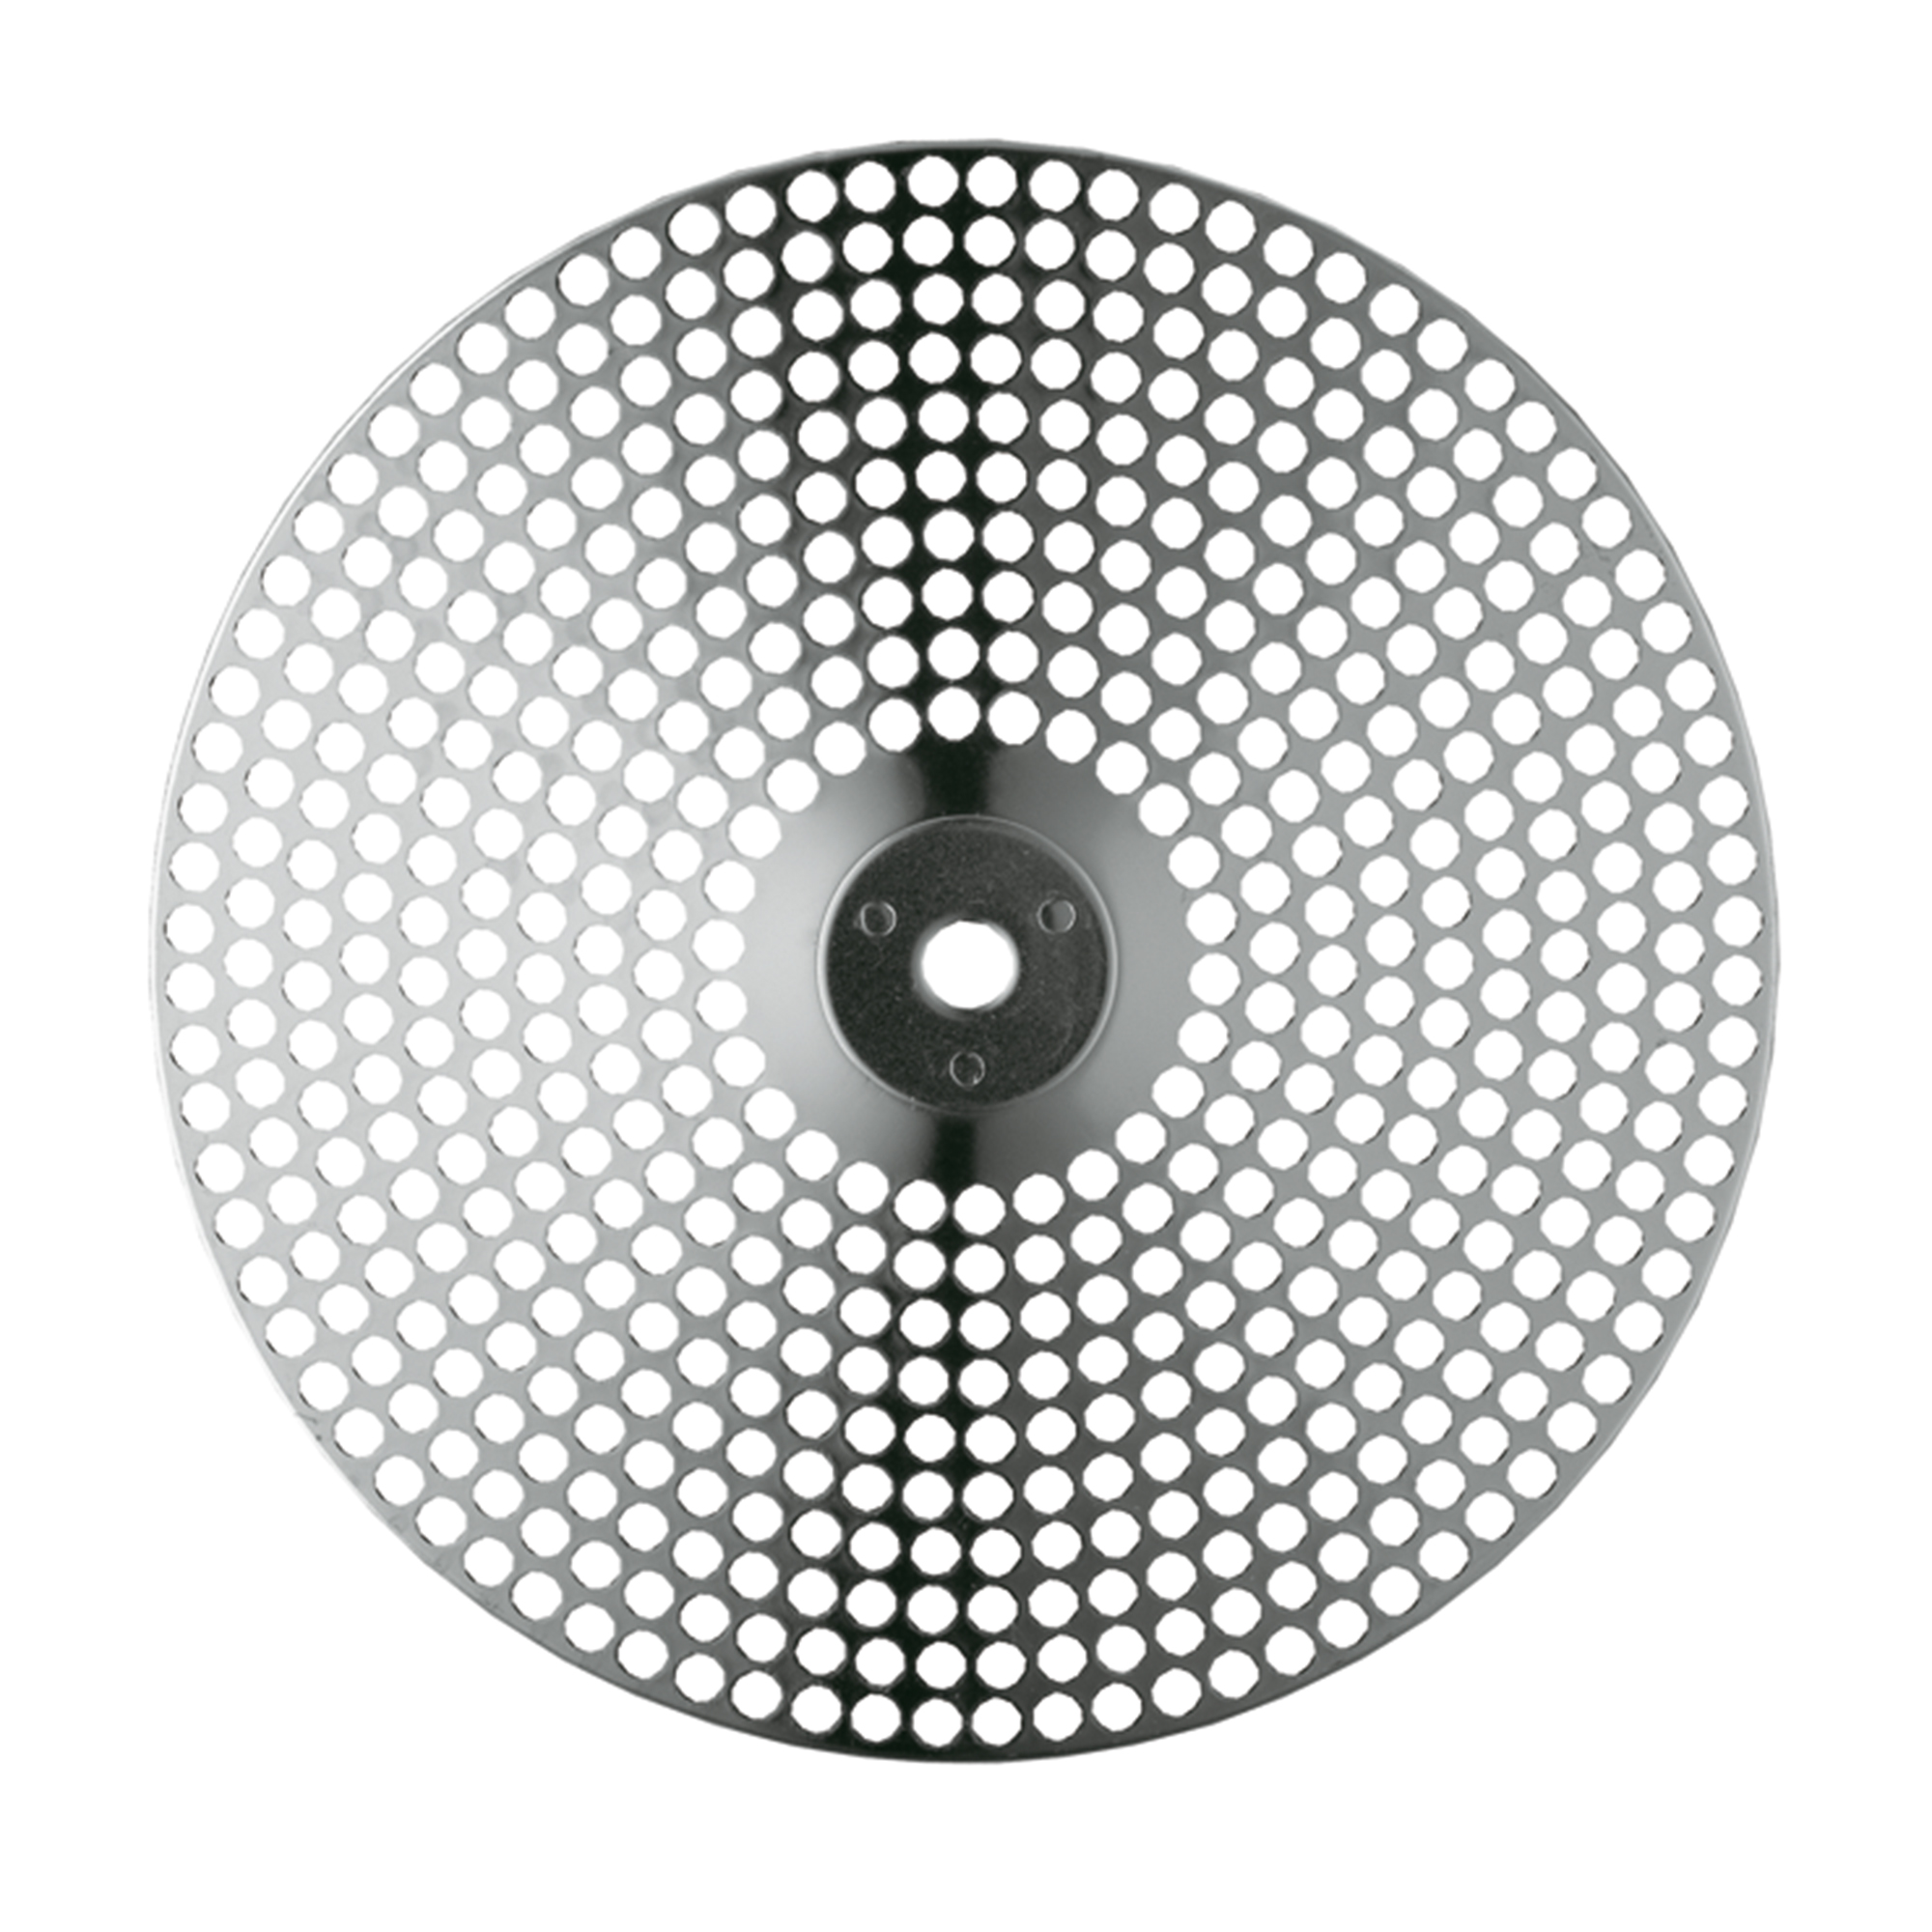 Sieve Disc 4 mm/0.2 in. (for Item no. 16251 & 16252)